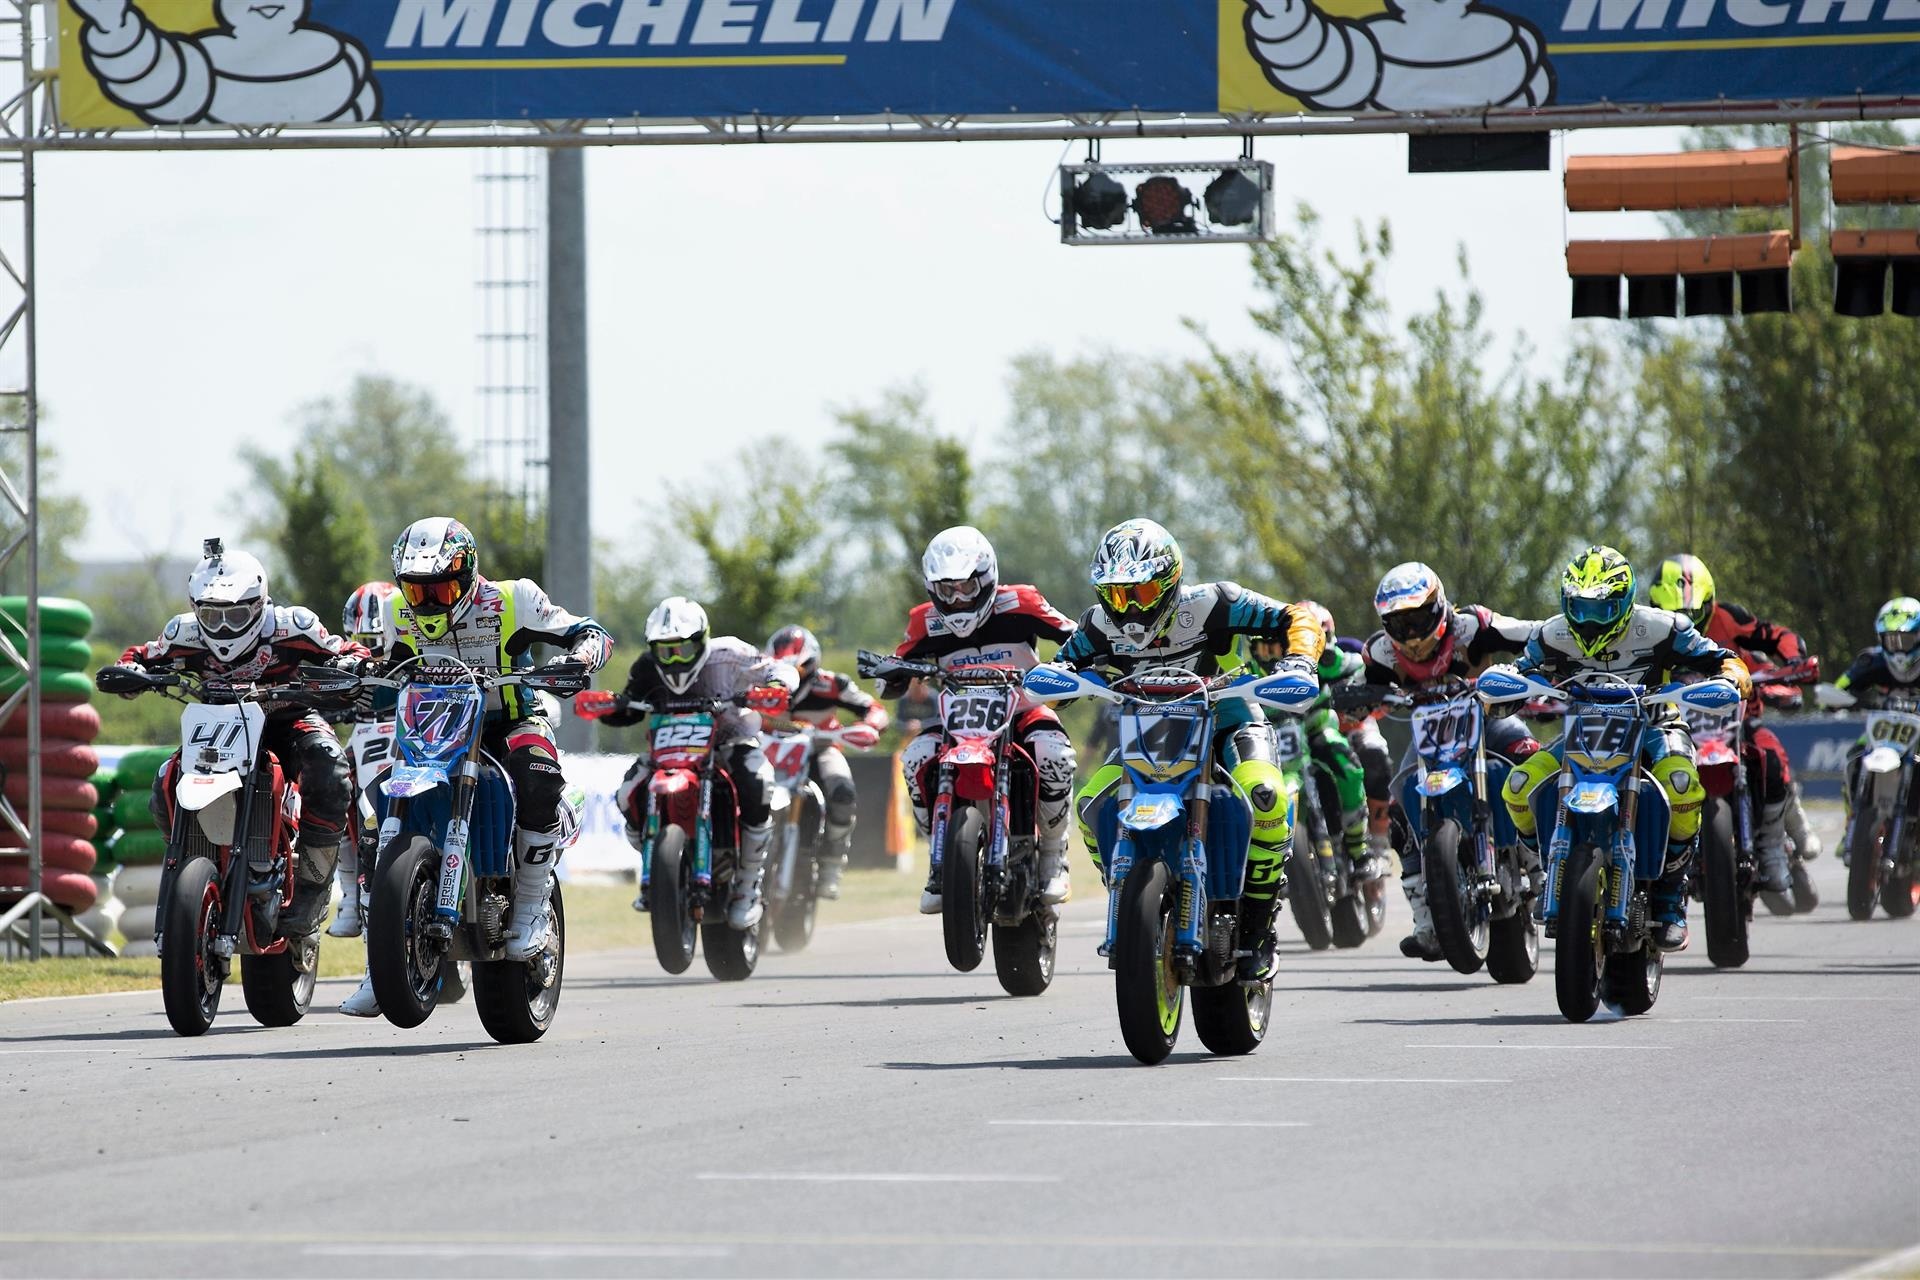 Supermoto: The riders from 11 countries, National champions, The spirit of the competition. 1920x1280 HD Wallpaper.